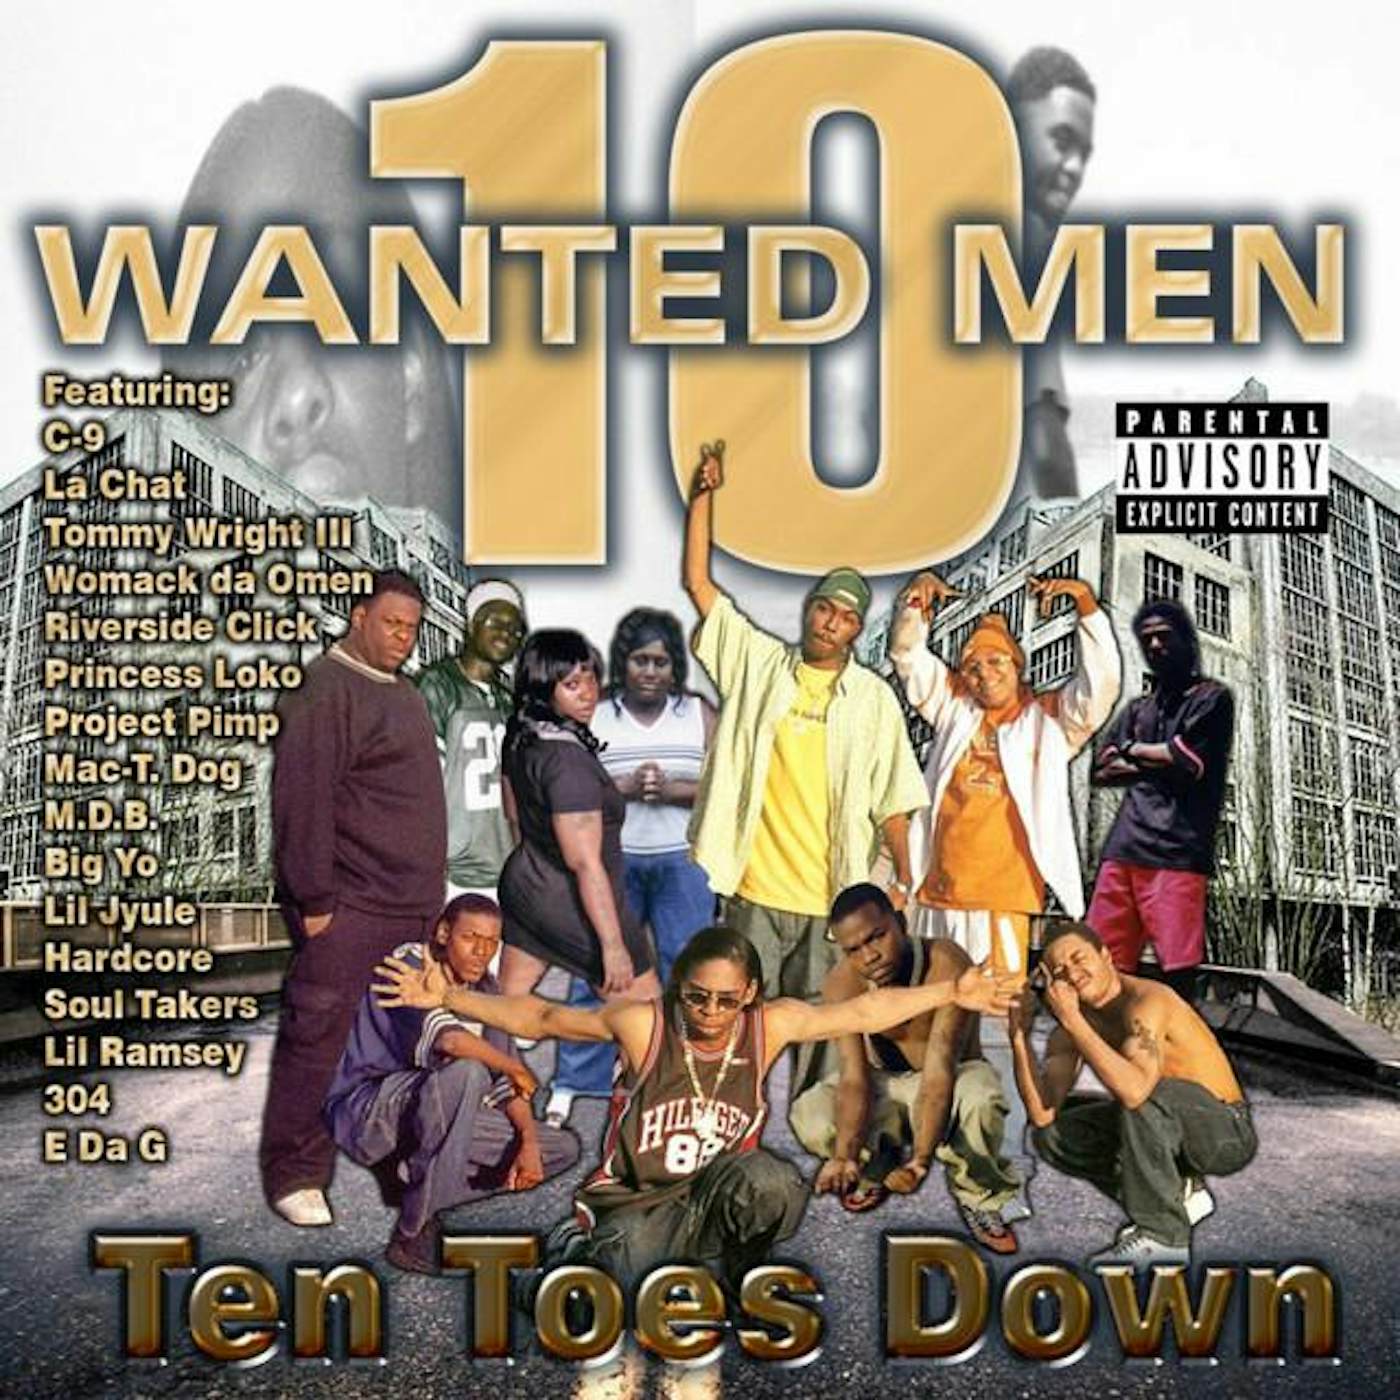 Хардкор 10. Fit men wanted. Ten wanted men. Street Smart records. Tommy Wright lll.